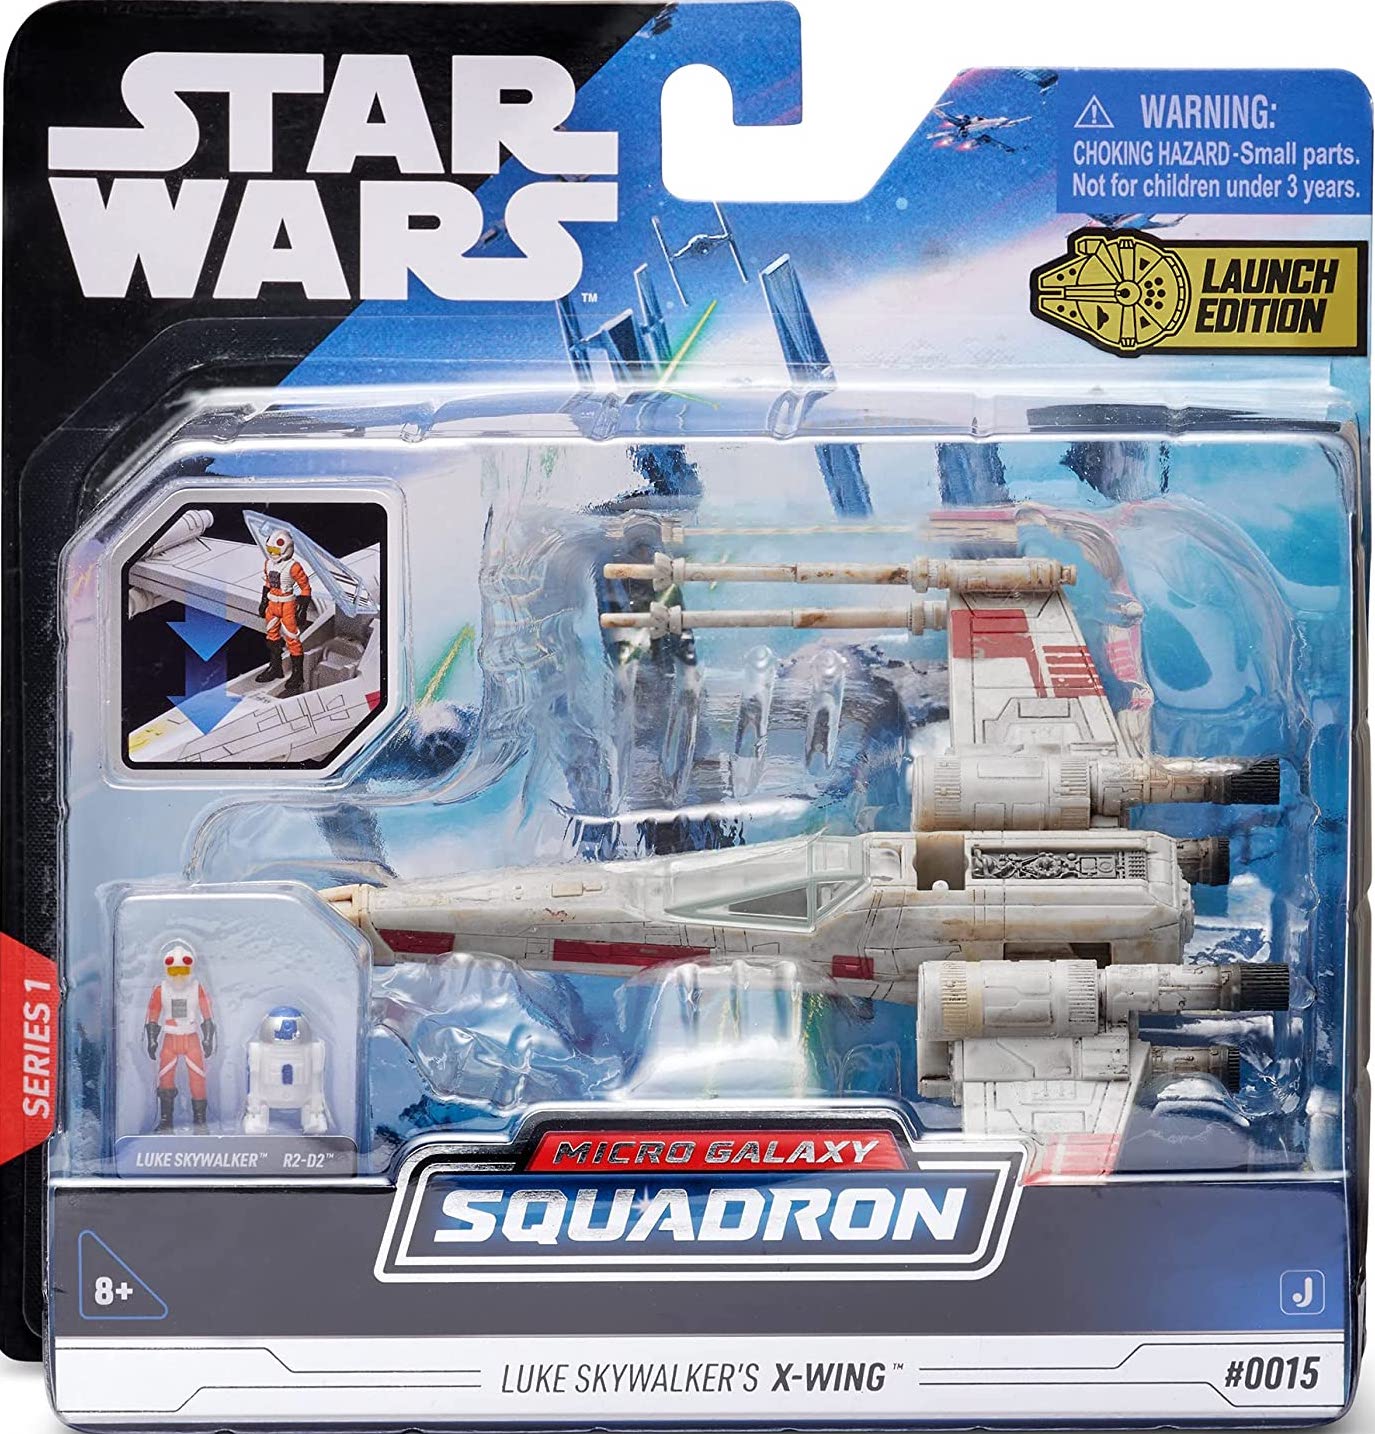 STAR WARS MICRO GALAXY SQUADRON Starfighter Class Luke Skywalker’S X-Wing 5-Inch Vehicle with 1-Inch Luke Skywalker & R2-D2 Micro Figures 